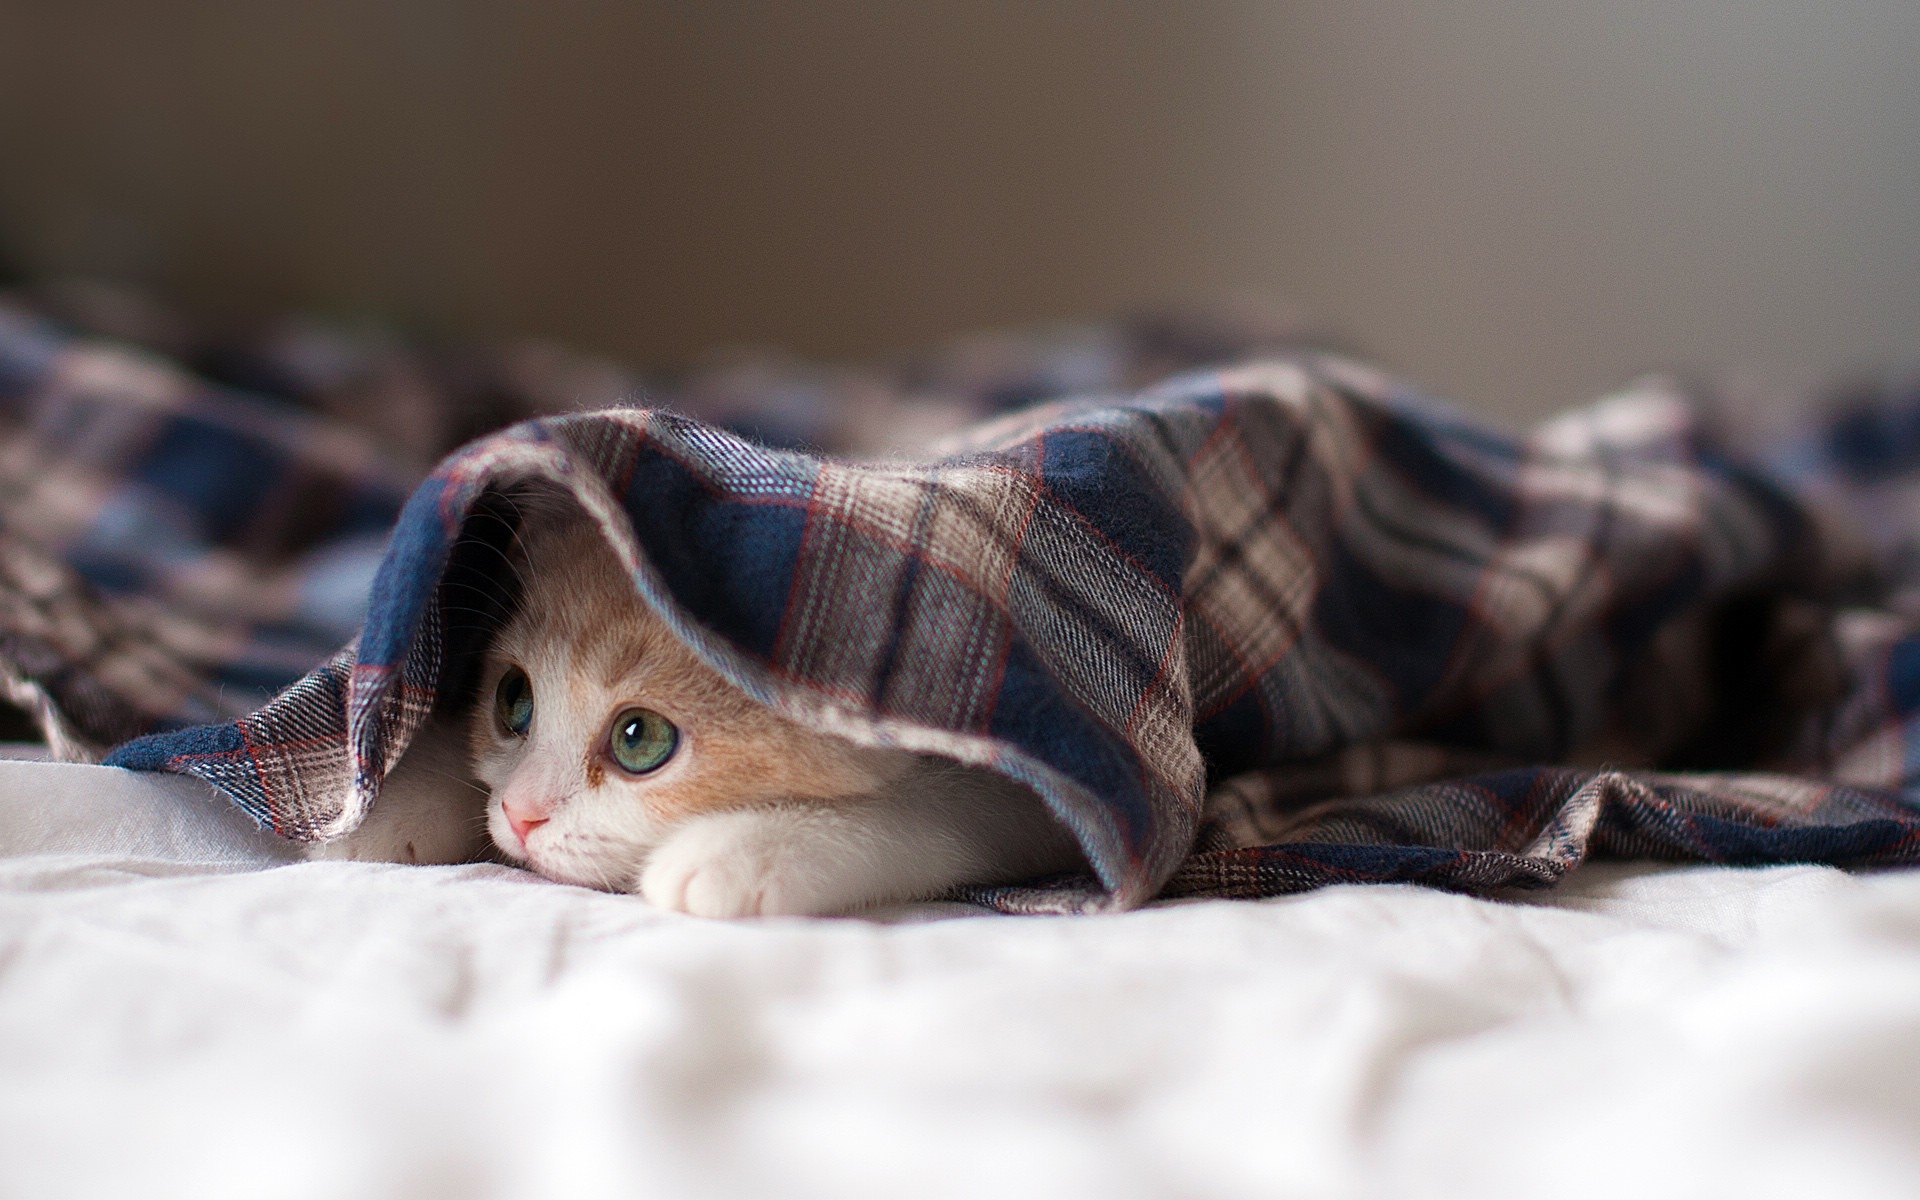 A kitten hiding under the covers